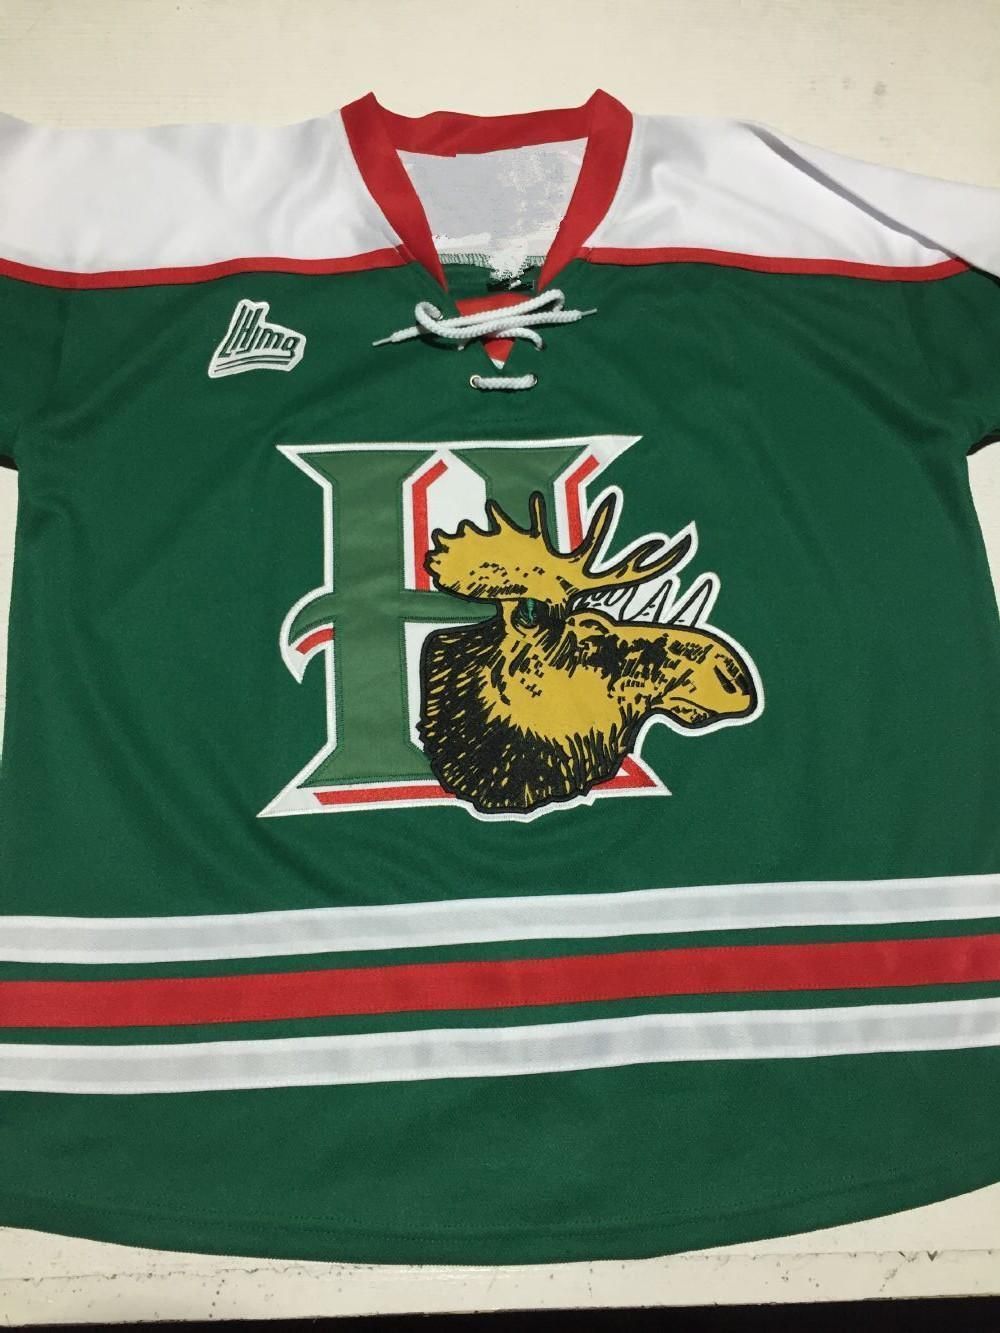 Custom Men #13 NICO HISCHIER HALIFAX MOOSEHEADS WHITE RED GREEN Hockey  Jersey 100% Embroidery Jersey Or Custom Any Name Or Number Jersey From  C2604, $19.77